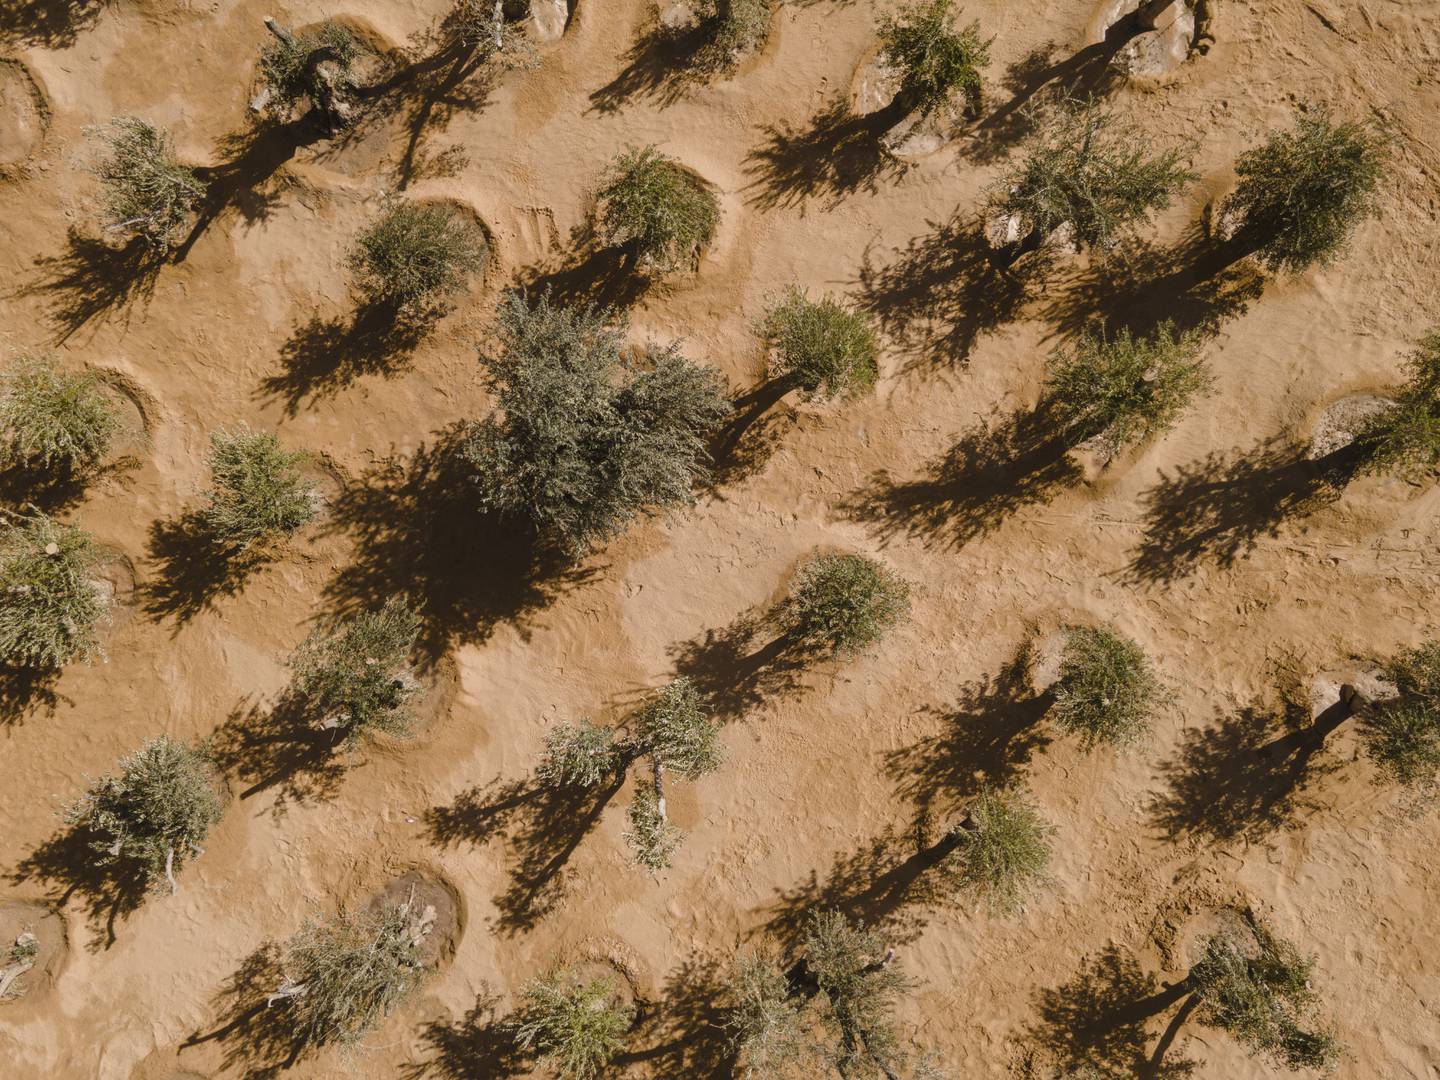 Khalil Rabah's 'Grounding' for Desert X AlUla 2022 is a grove of olive trees brought in and replanted. Photo: Lance Gerber